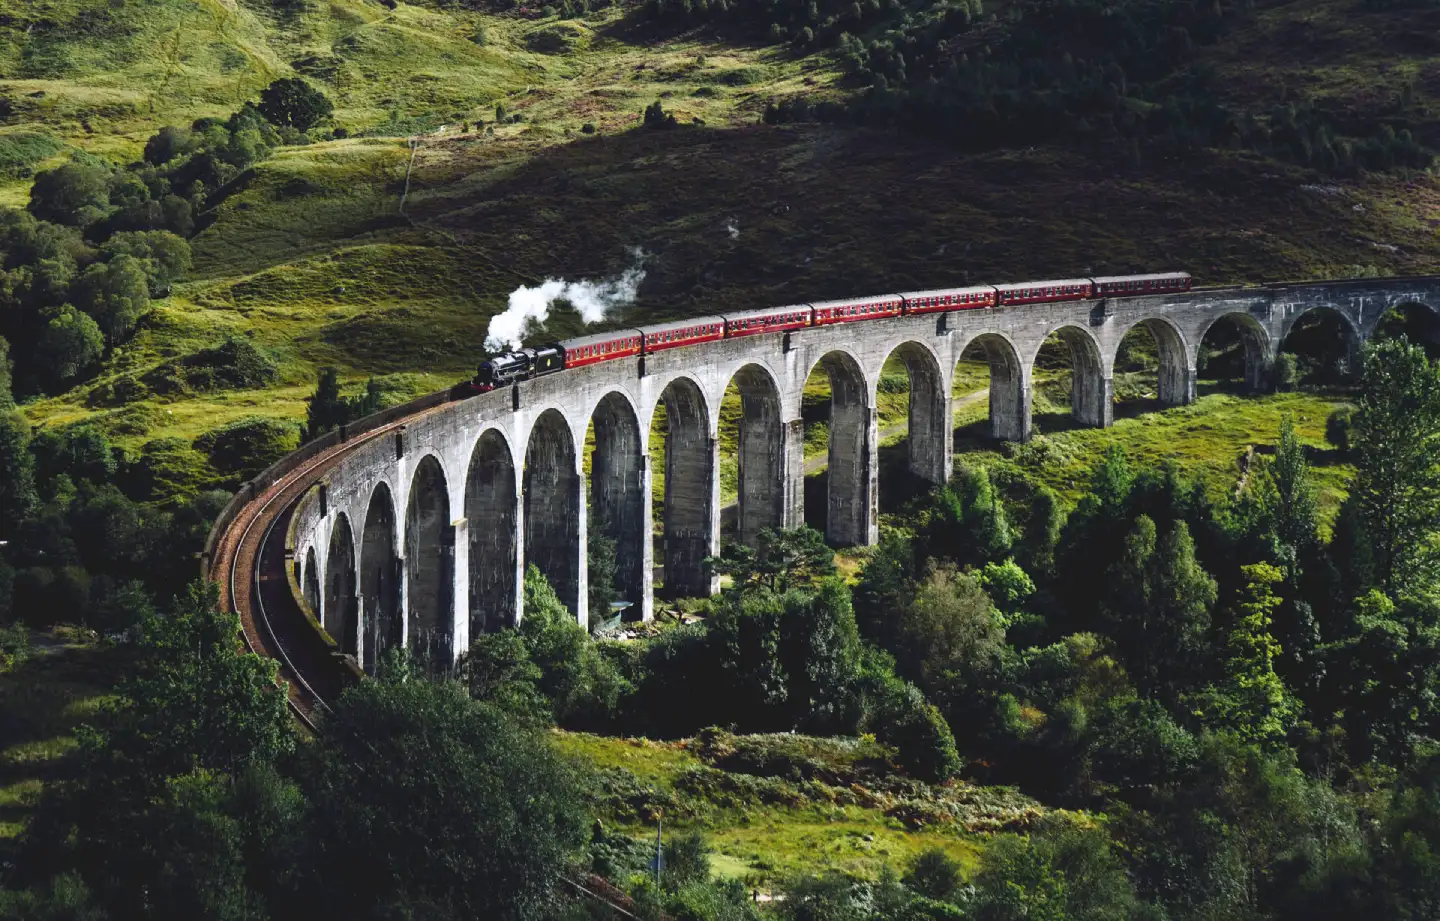 oyal Scotsman train across the Glenfinnan Viaduct in Scotland, made famous by the Harry Potter train: the iconic Hogwarts Express.